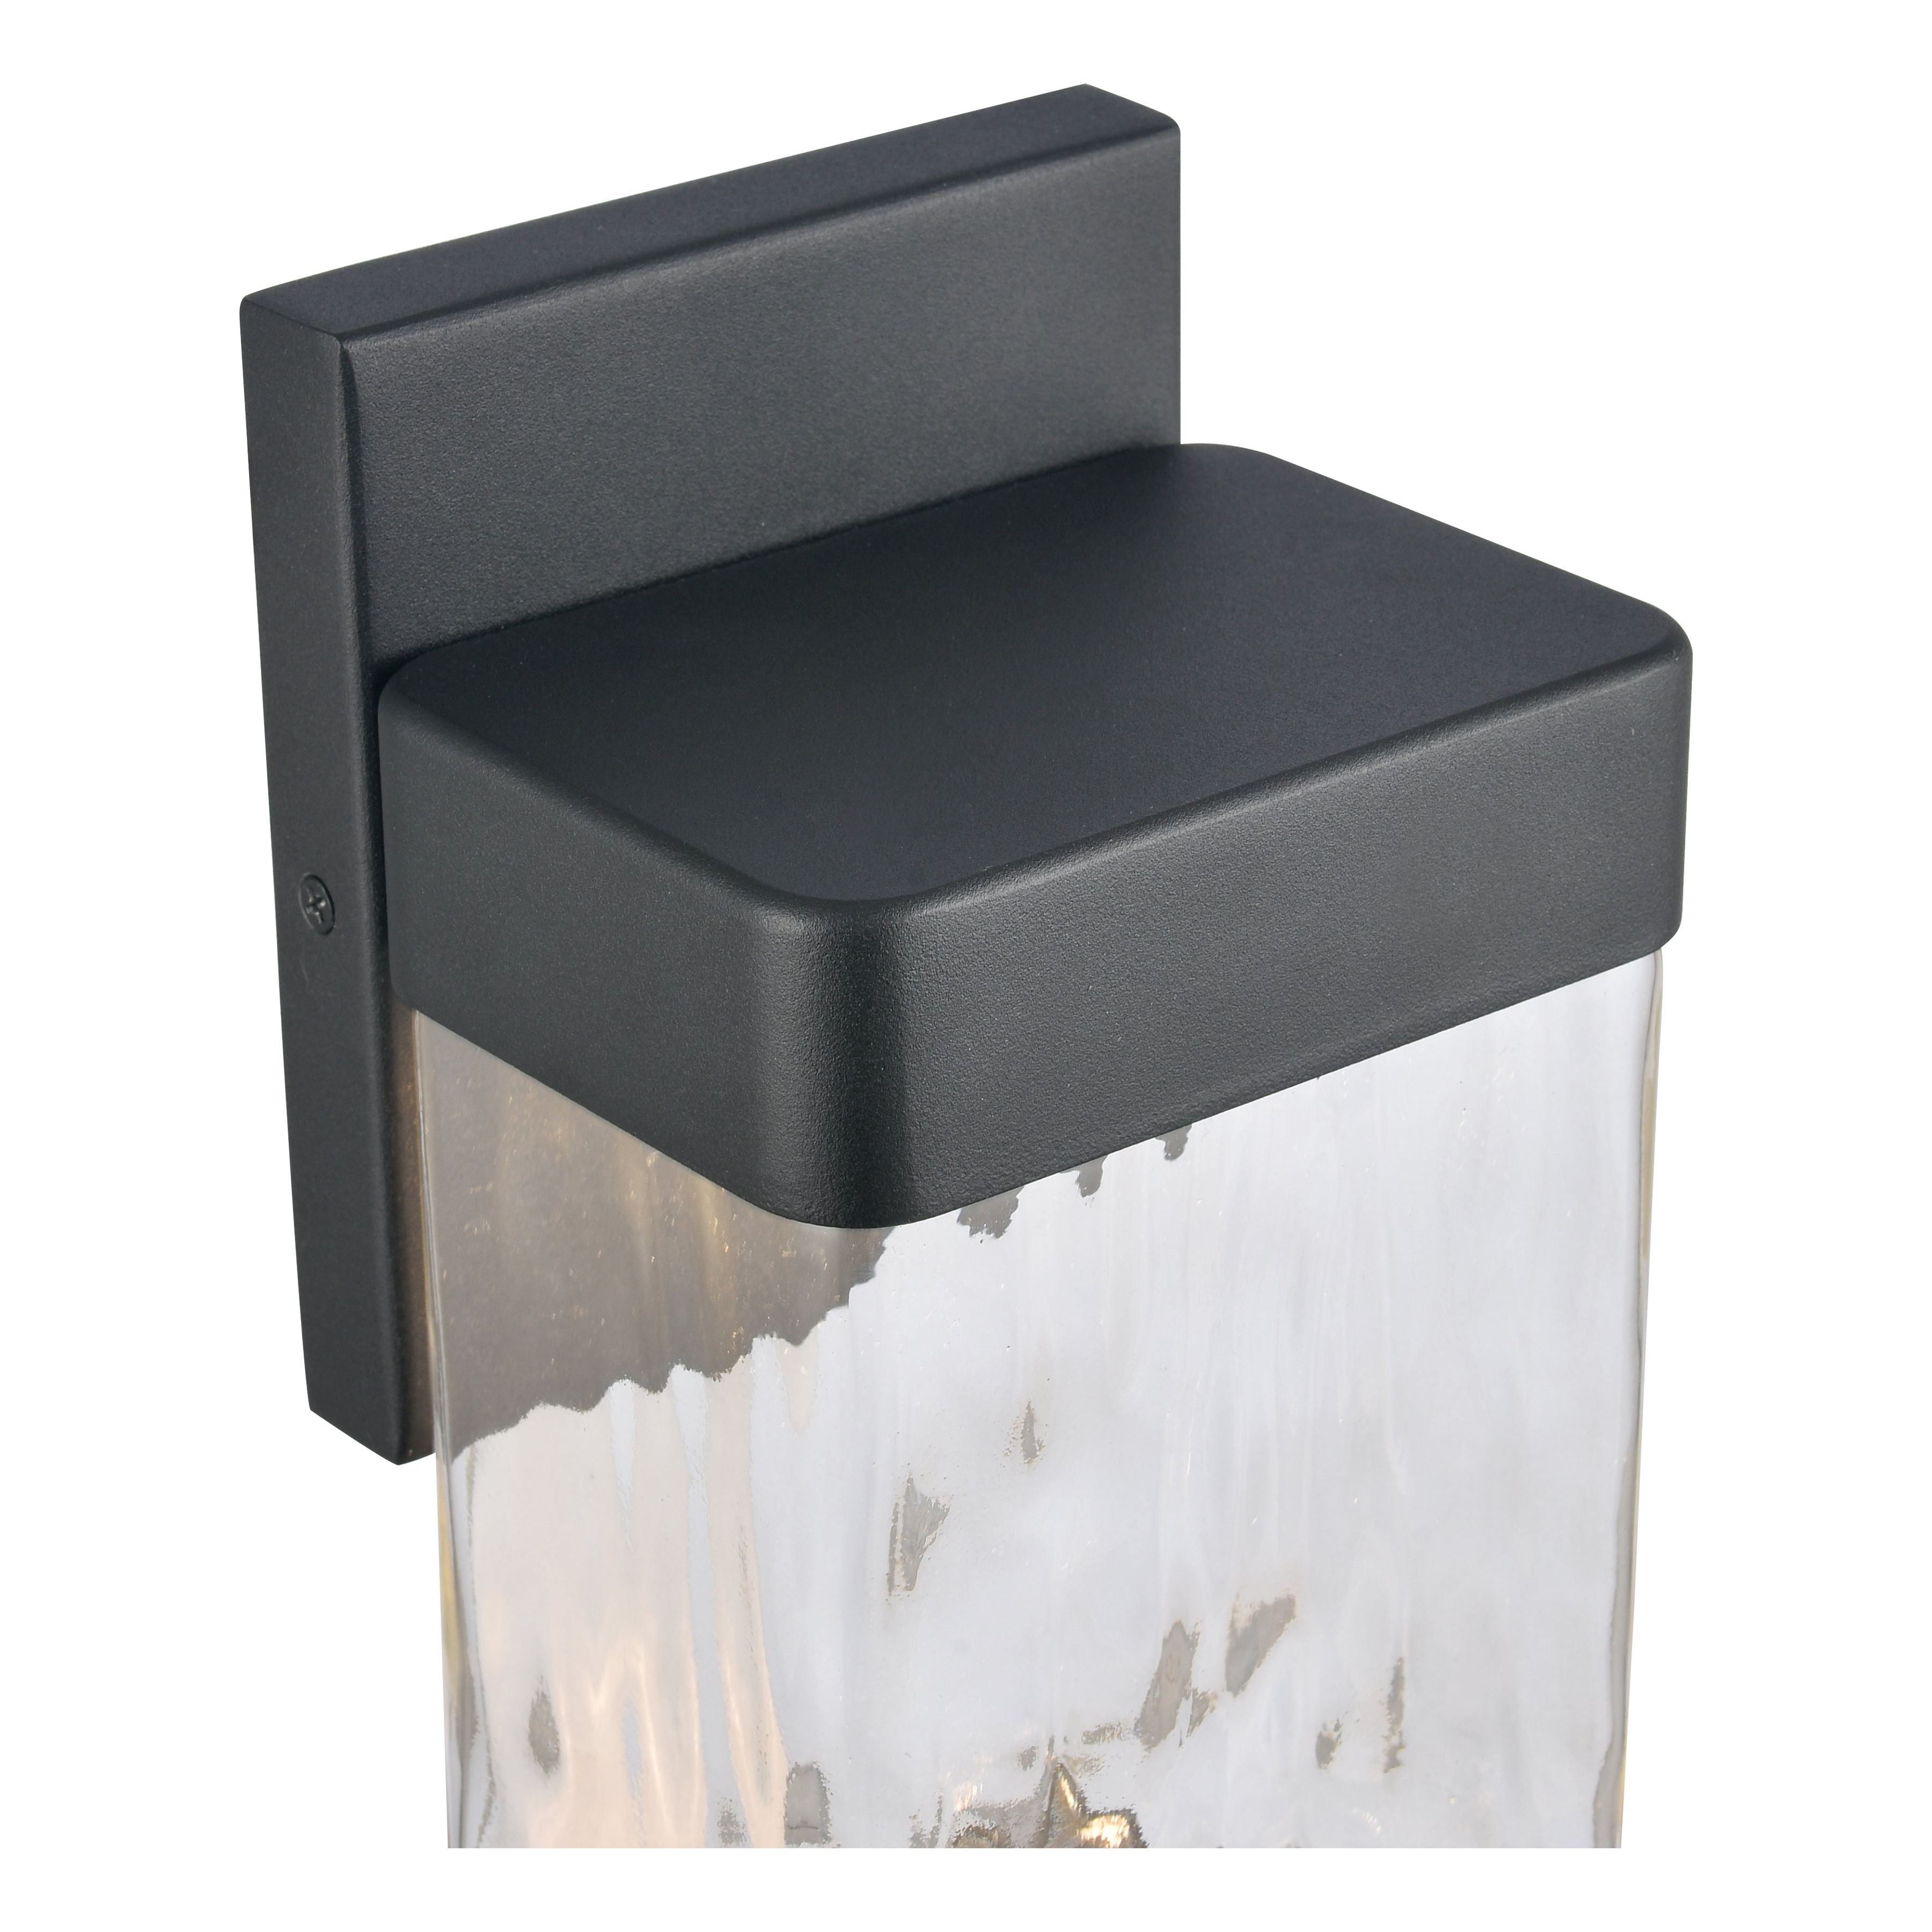 Cornice 9.75" High Integrated LED Outdoor Sconce